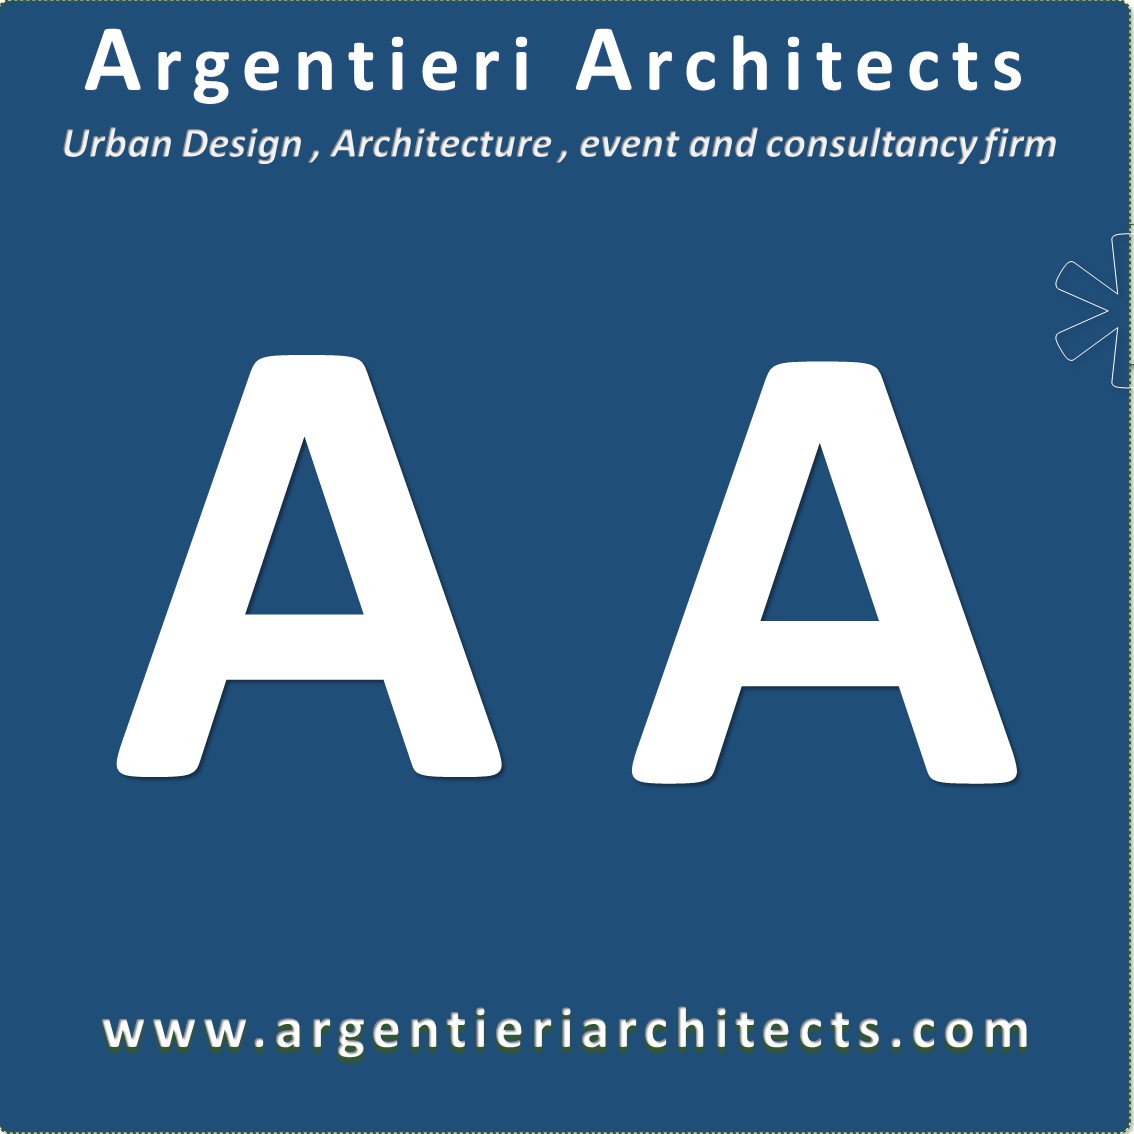 Contact- Argentieri Architects is an innovation and design firm. International expert on urban strategies & development, Smart Cities, architecture , retail and hospitality  